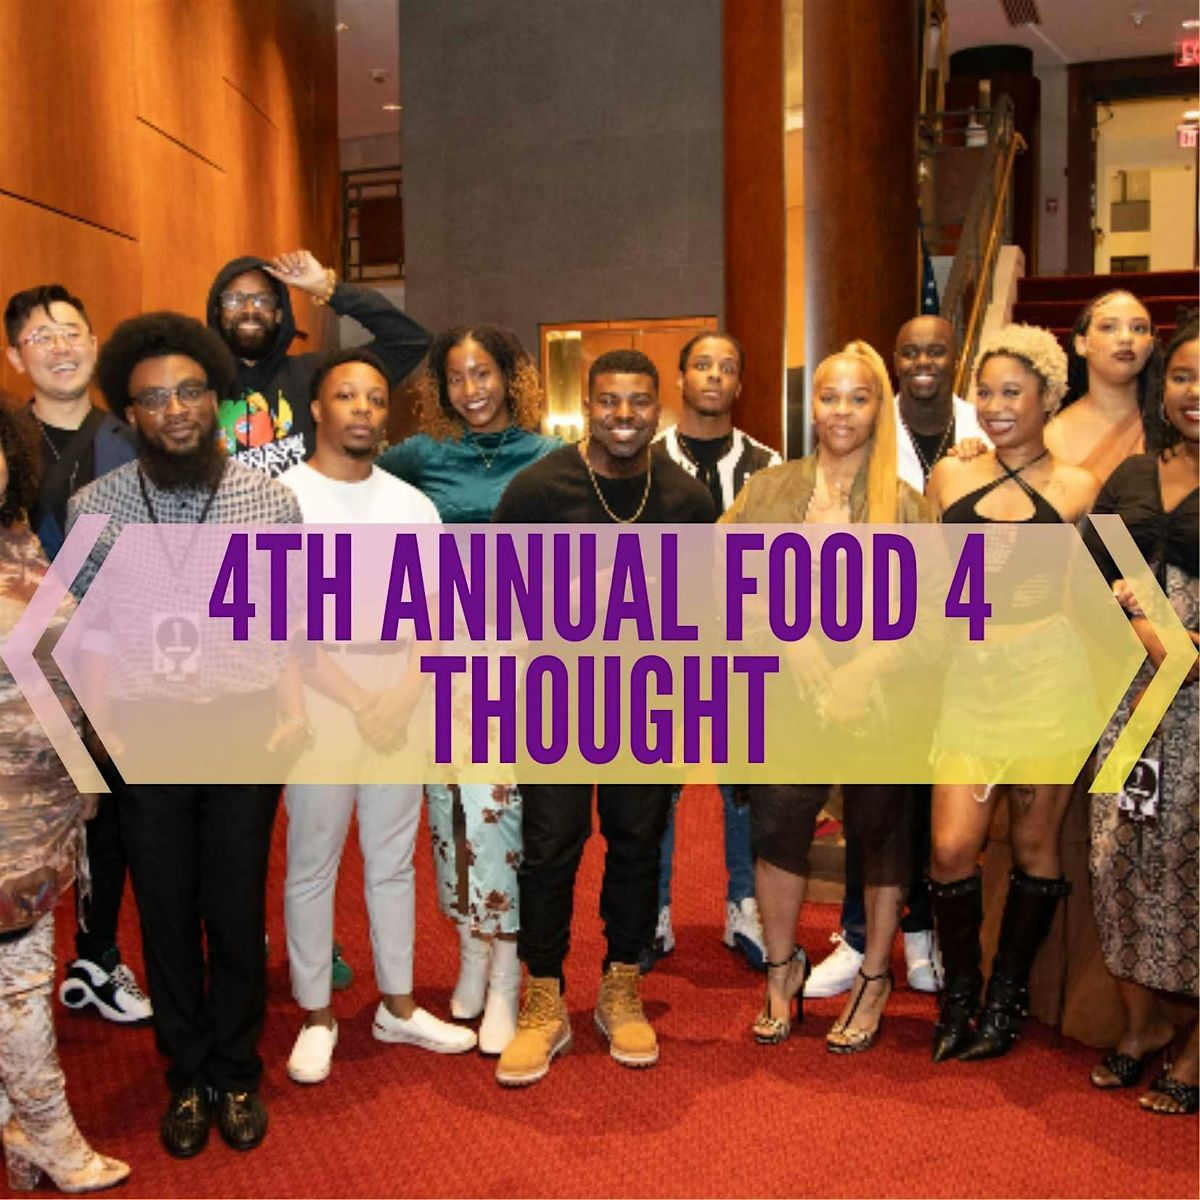 4th Annual Food 4 Thought SPONSORSHIP